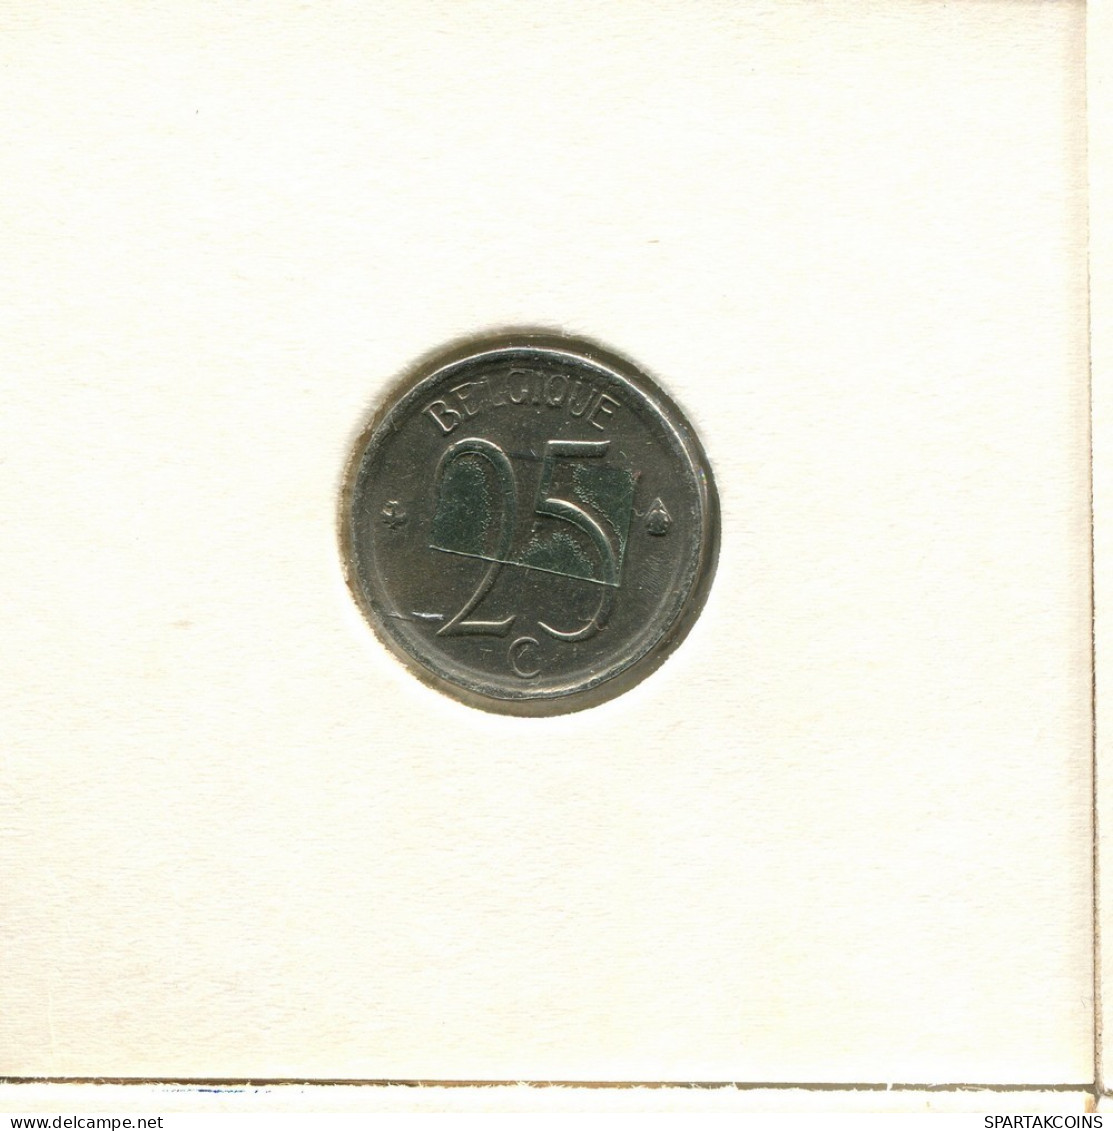 25 CENTIMES 1968 FRENCH Text BELGIUM Coin #BB267.U.A - 25 Cent